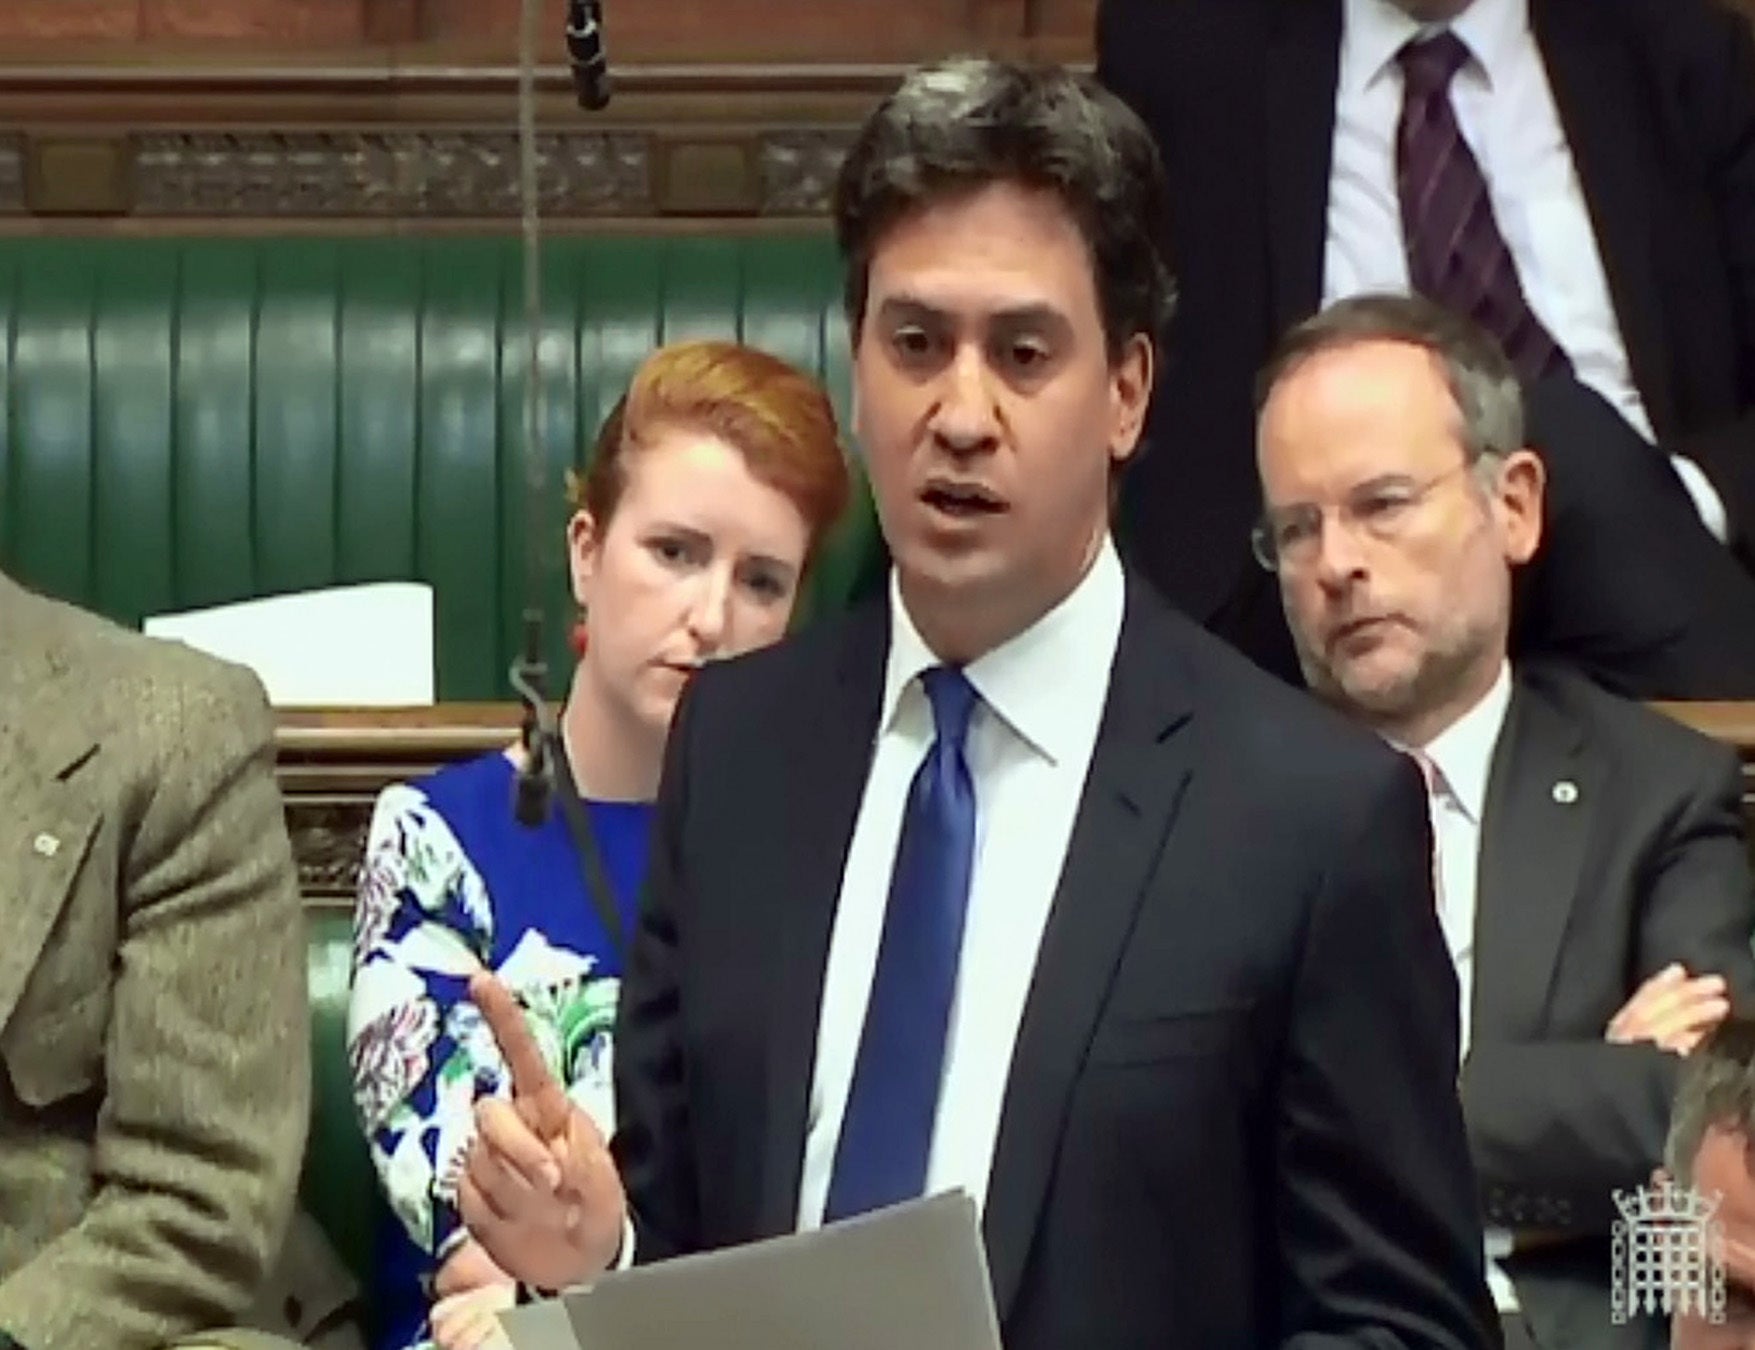 Ed Miliband last week, making his first speech in the House of Commons since he lost the election